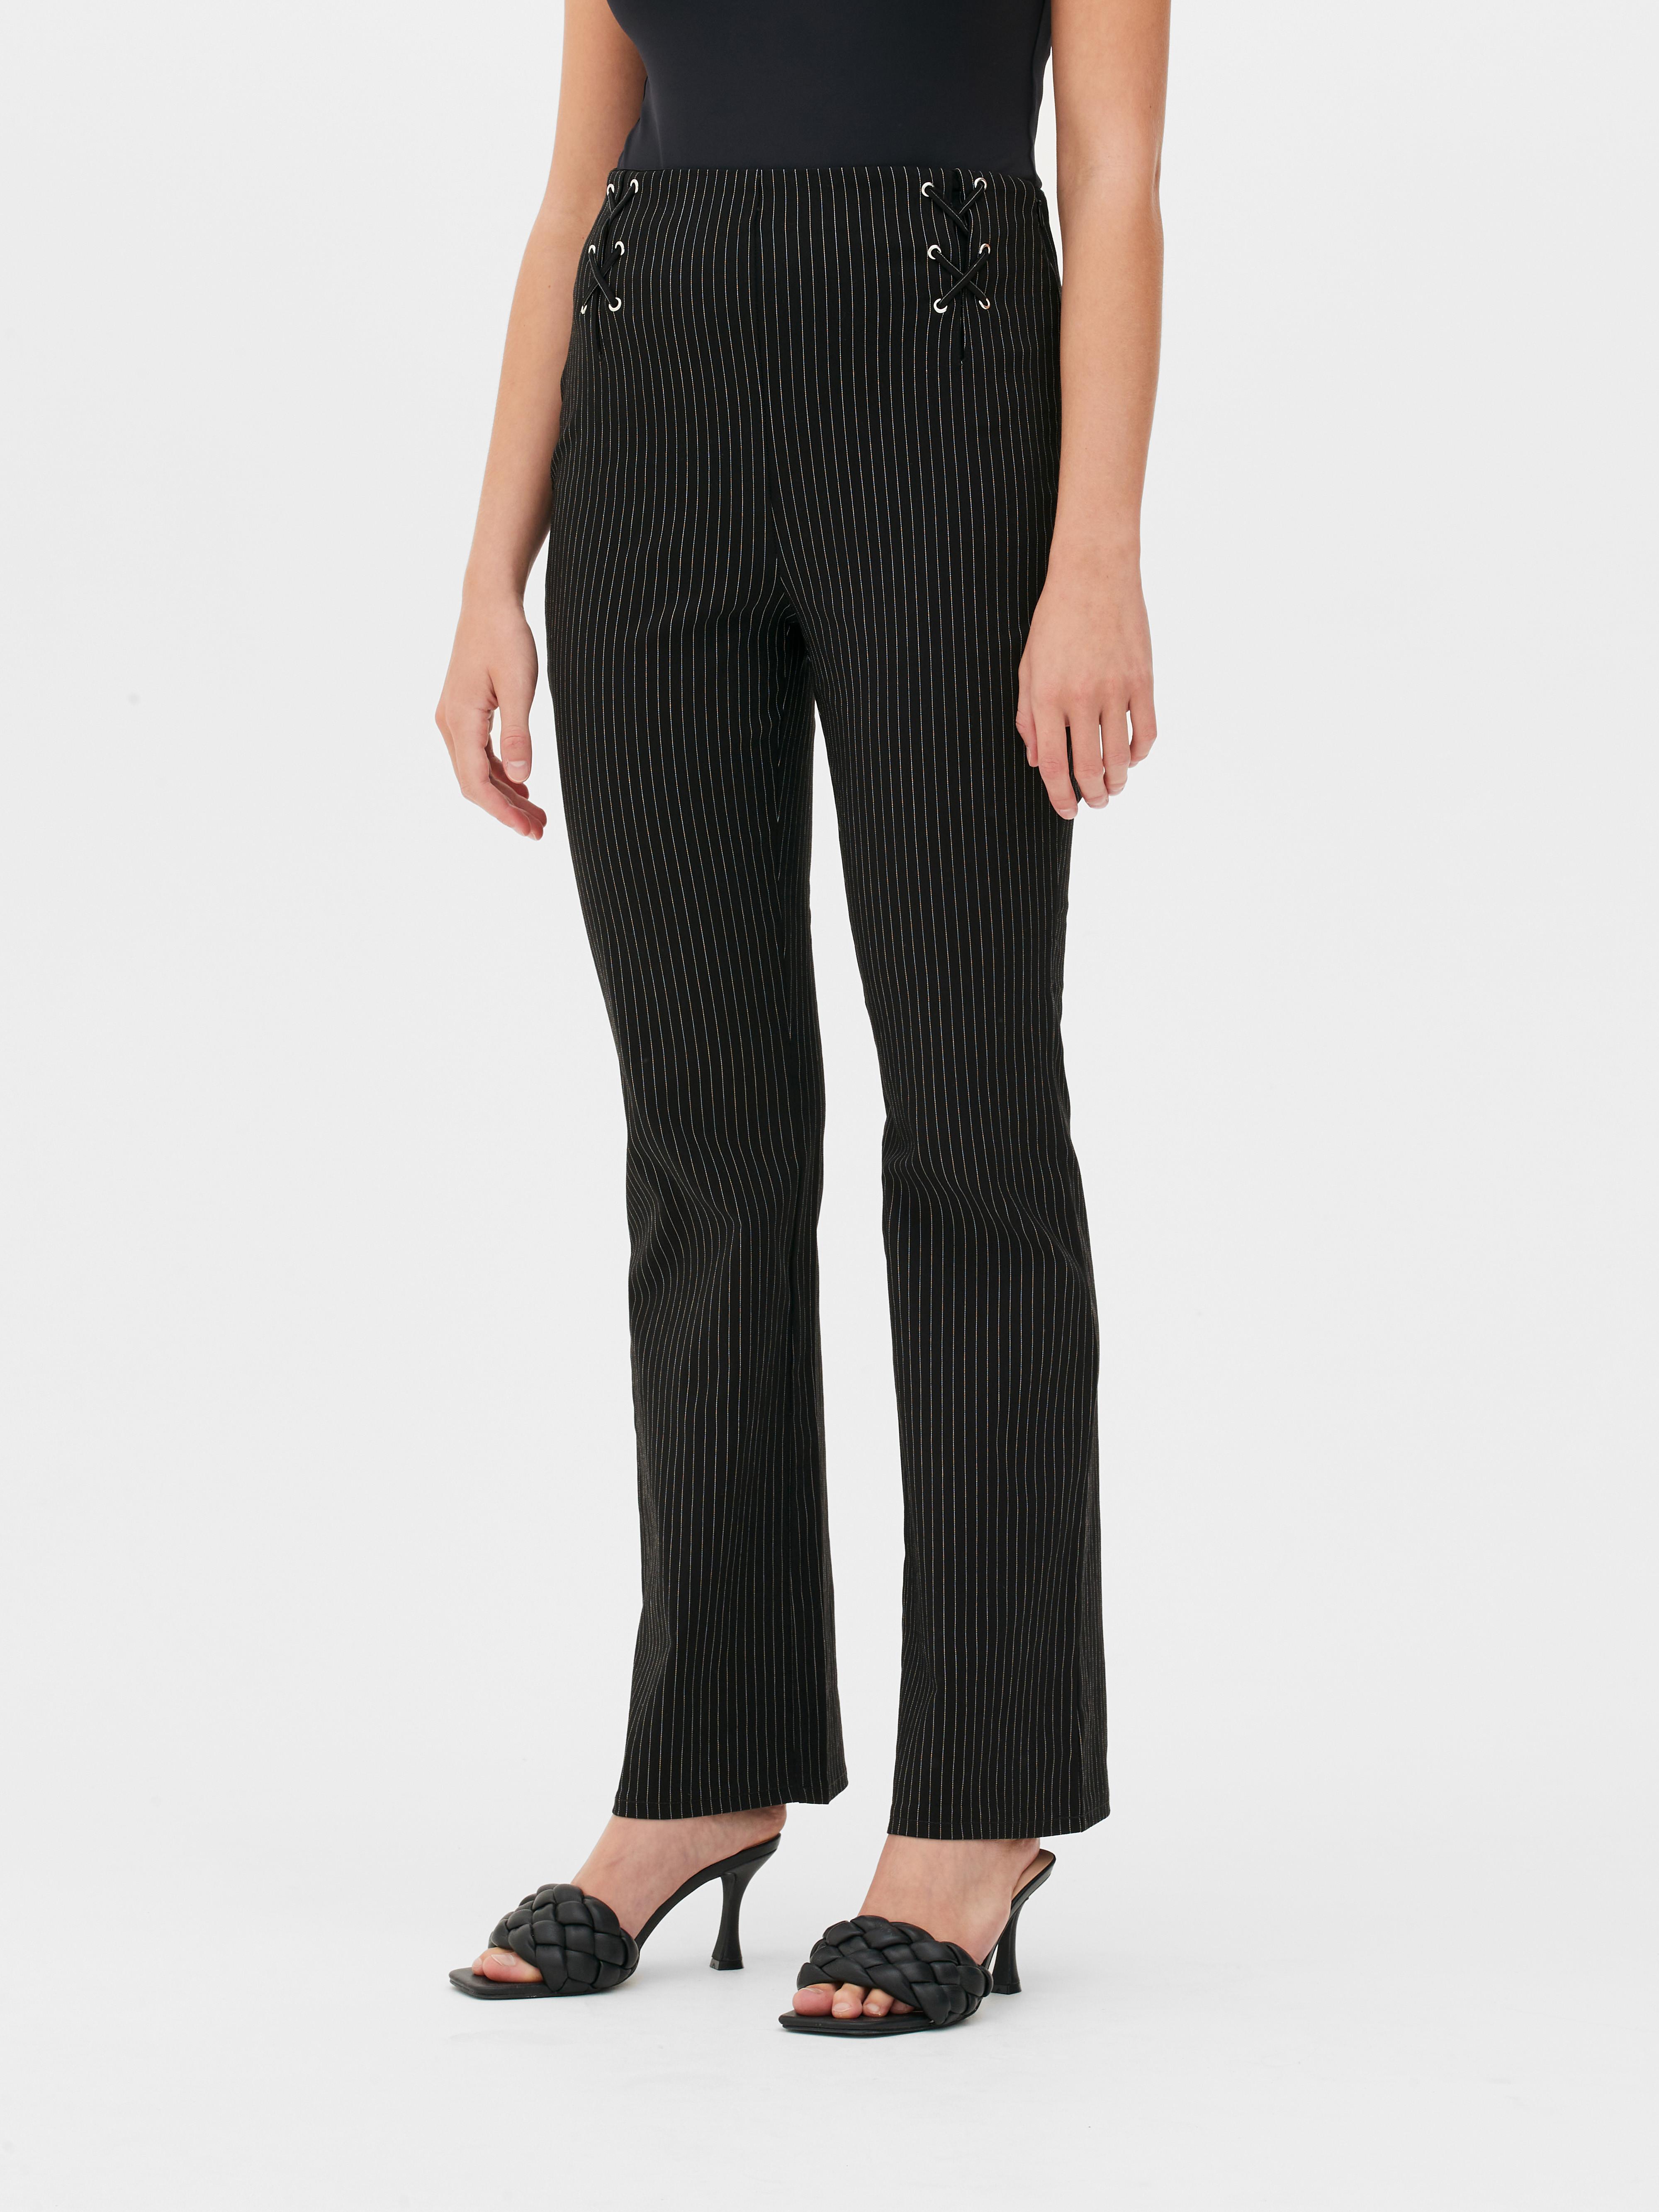 Pinstripe Corset-Style Flared Trousers